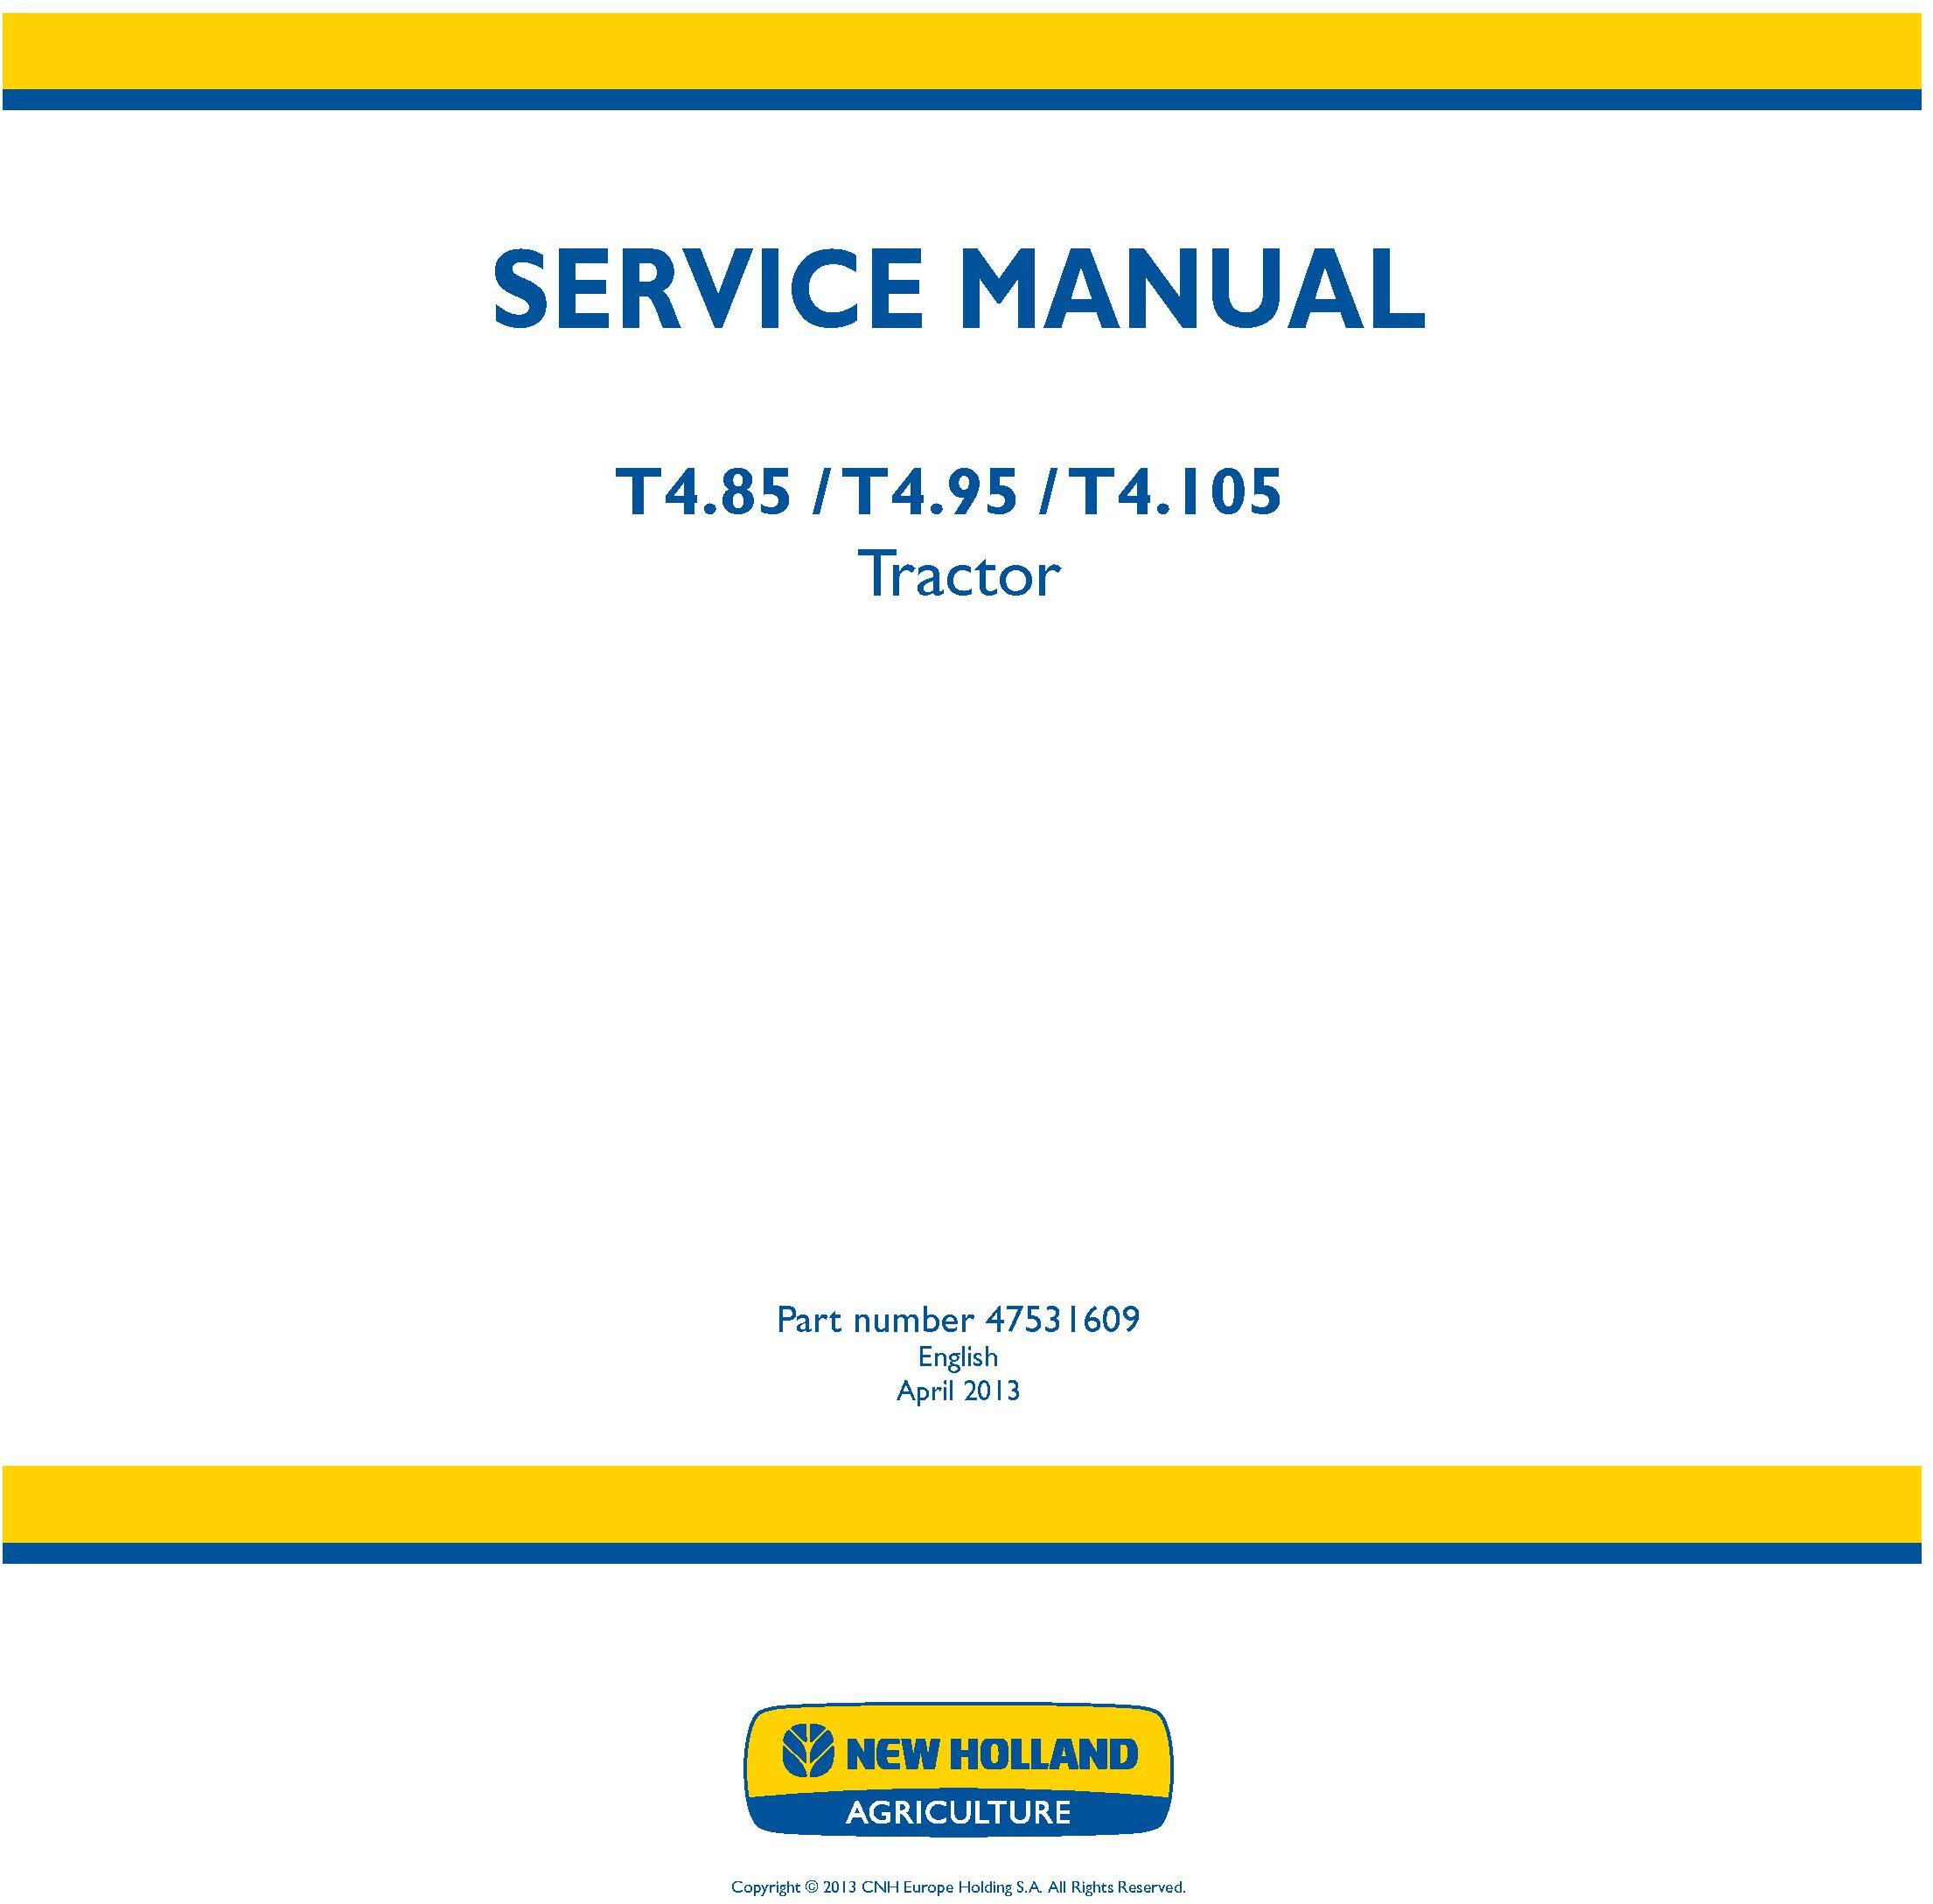 New Holland T4.85, T4.95, T4.105 Tractor Service Manual - 19387